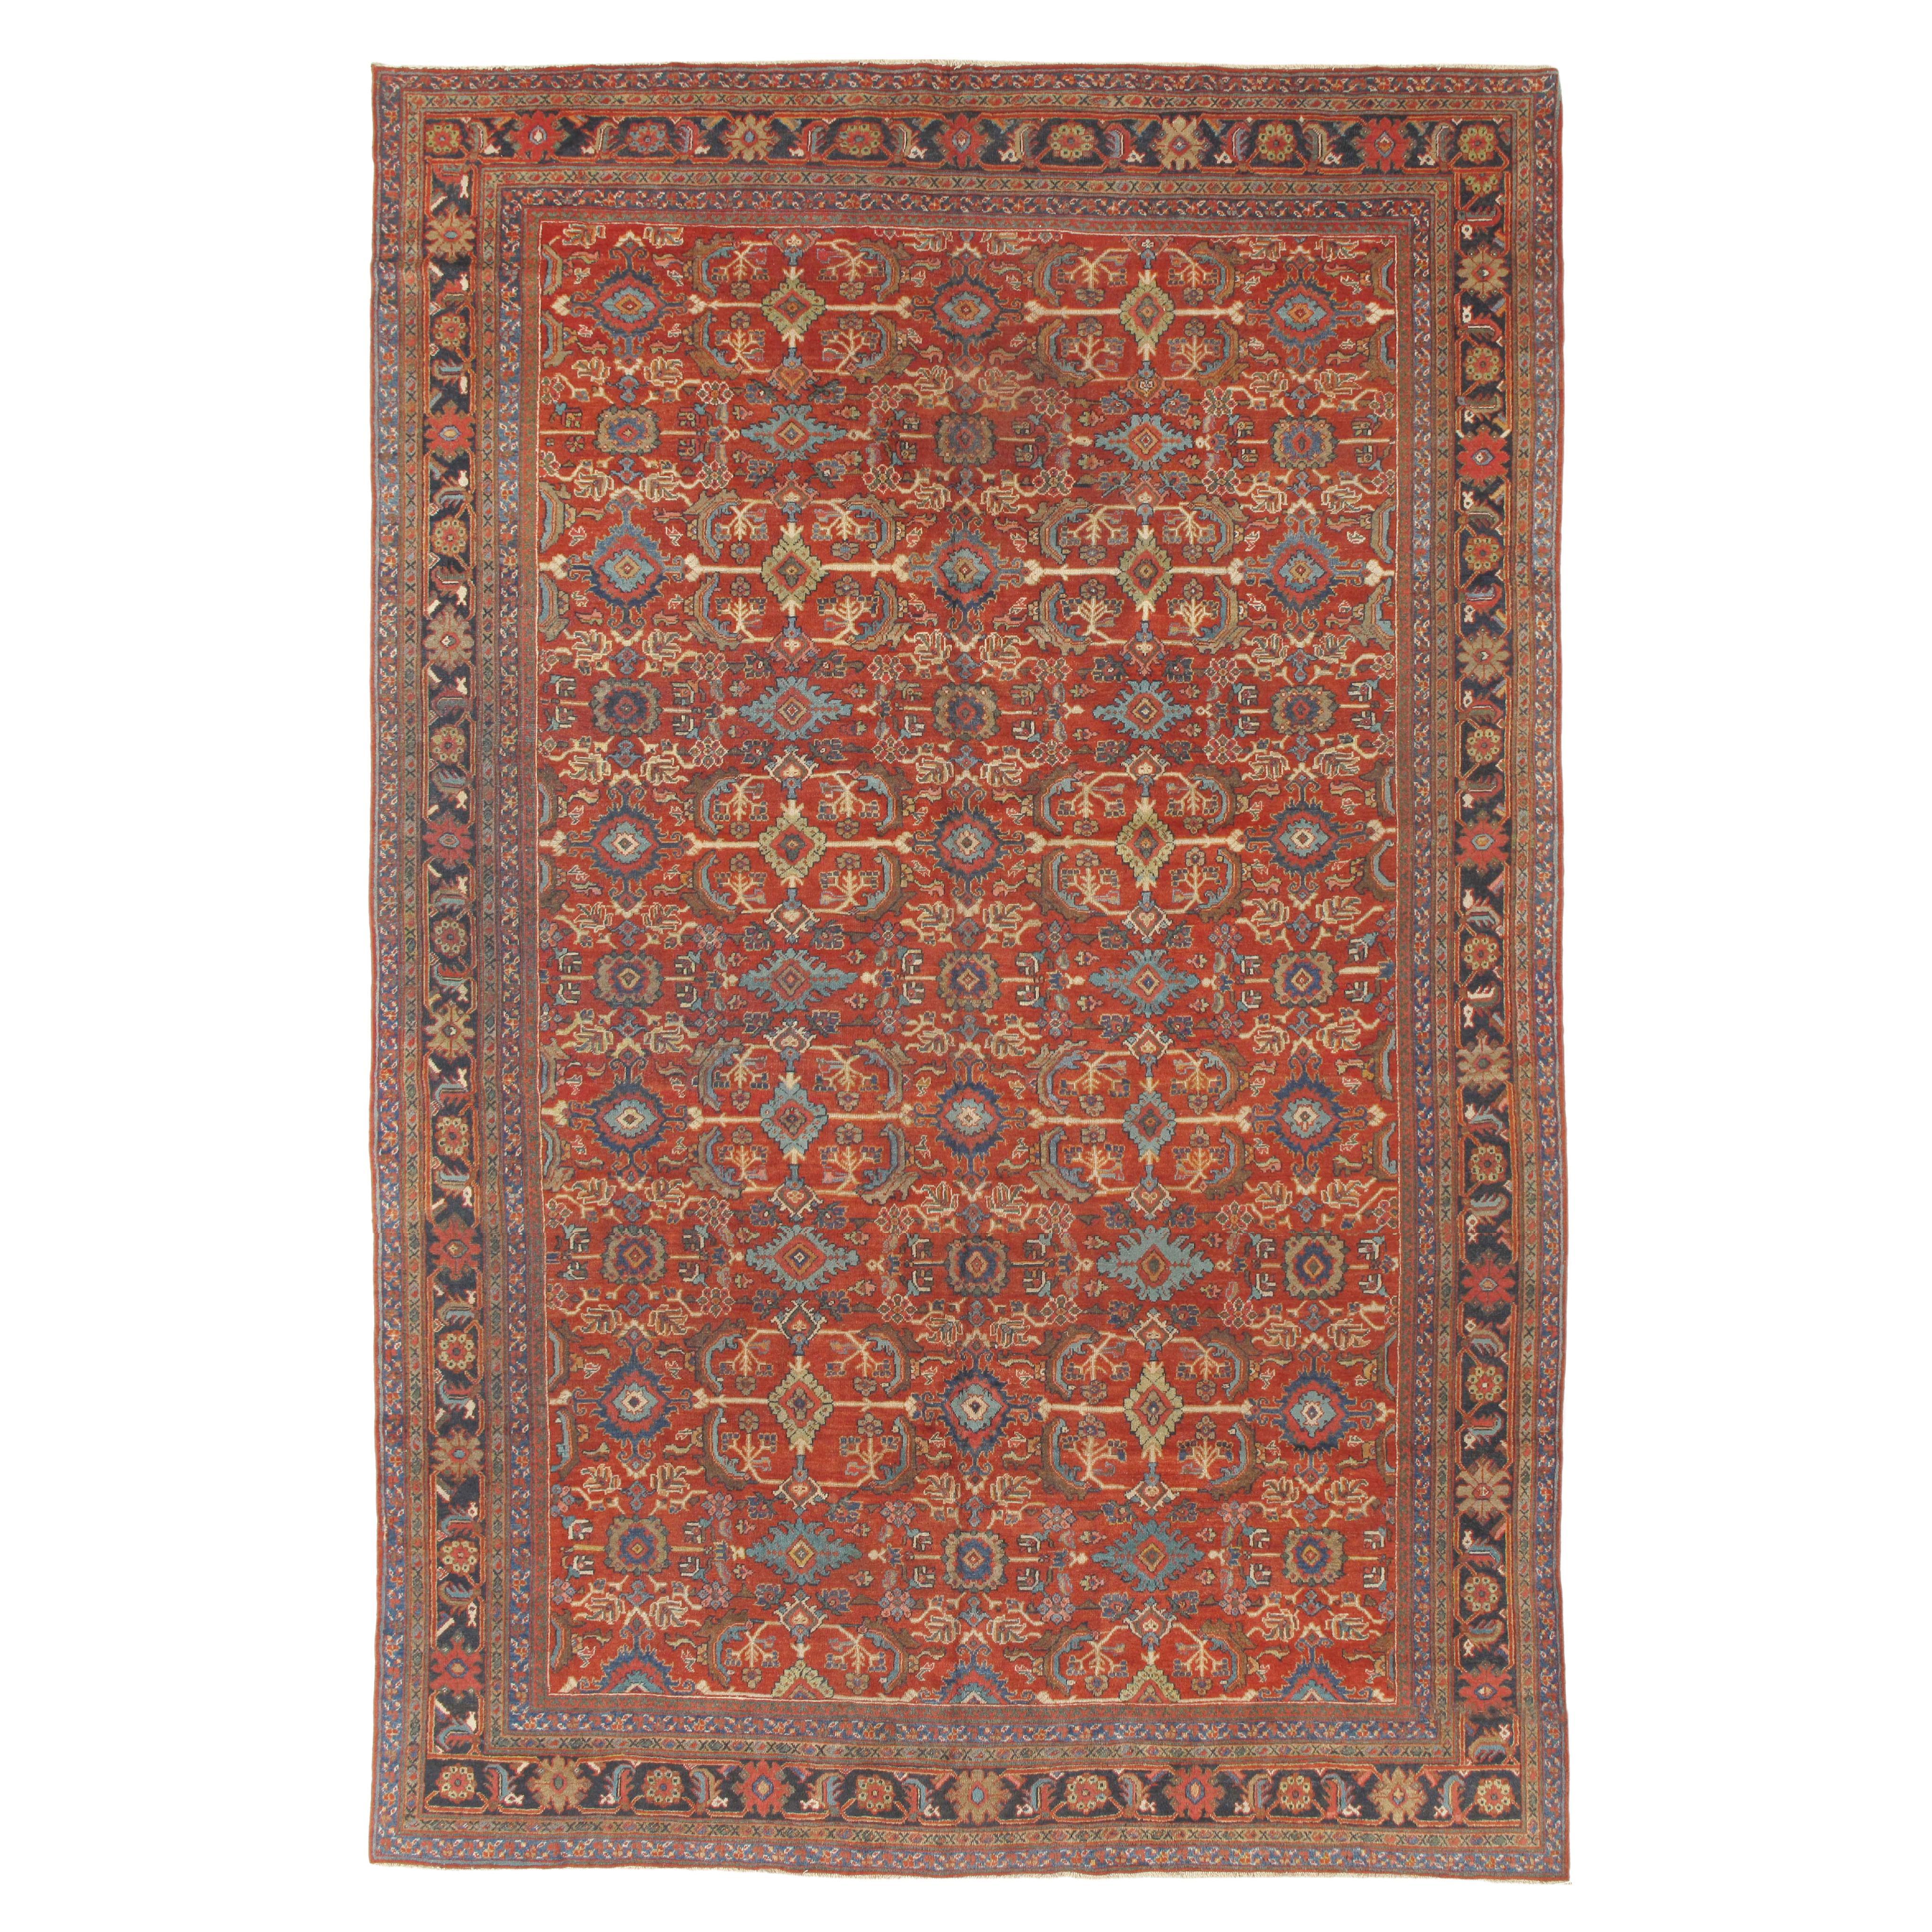 Antique Mahal Sultanabad Carpet Rug  9'8 x 14'6 For Sale